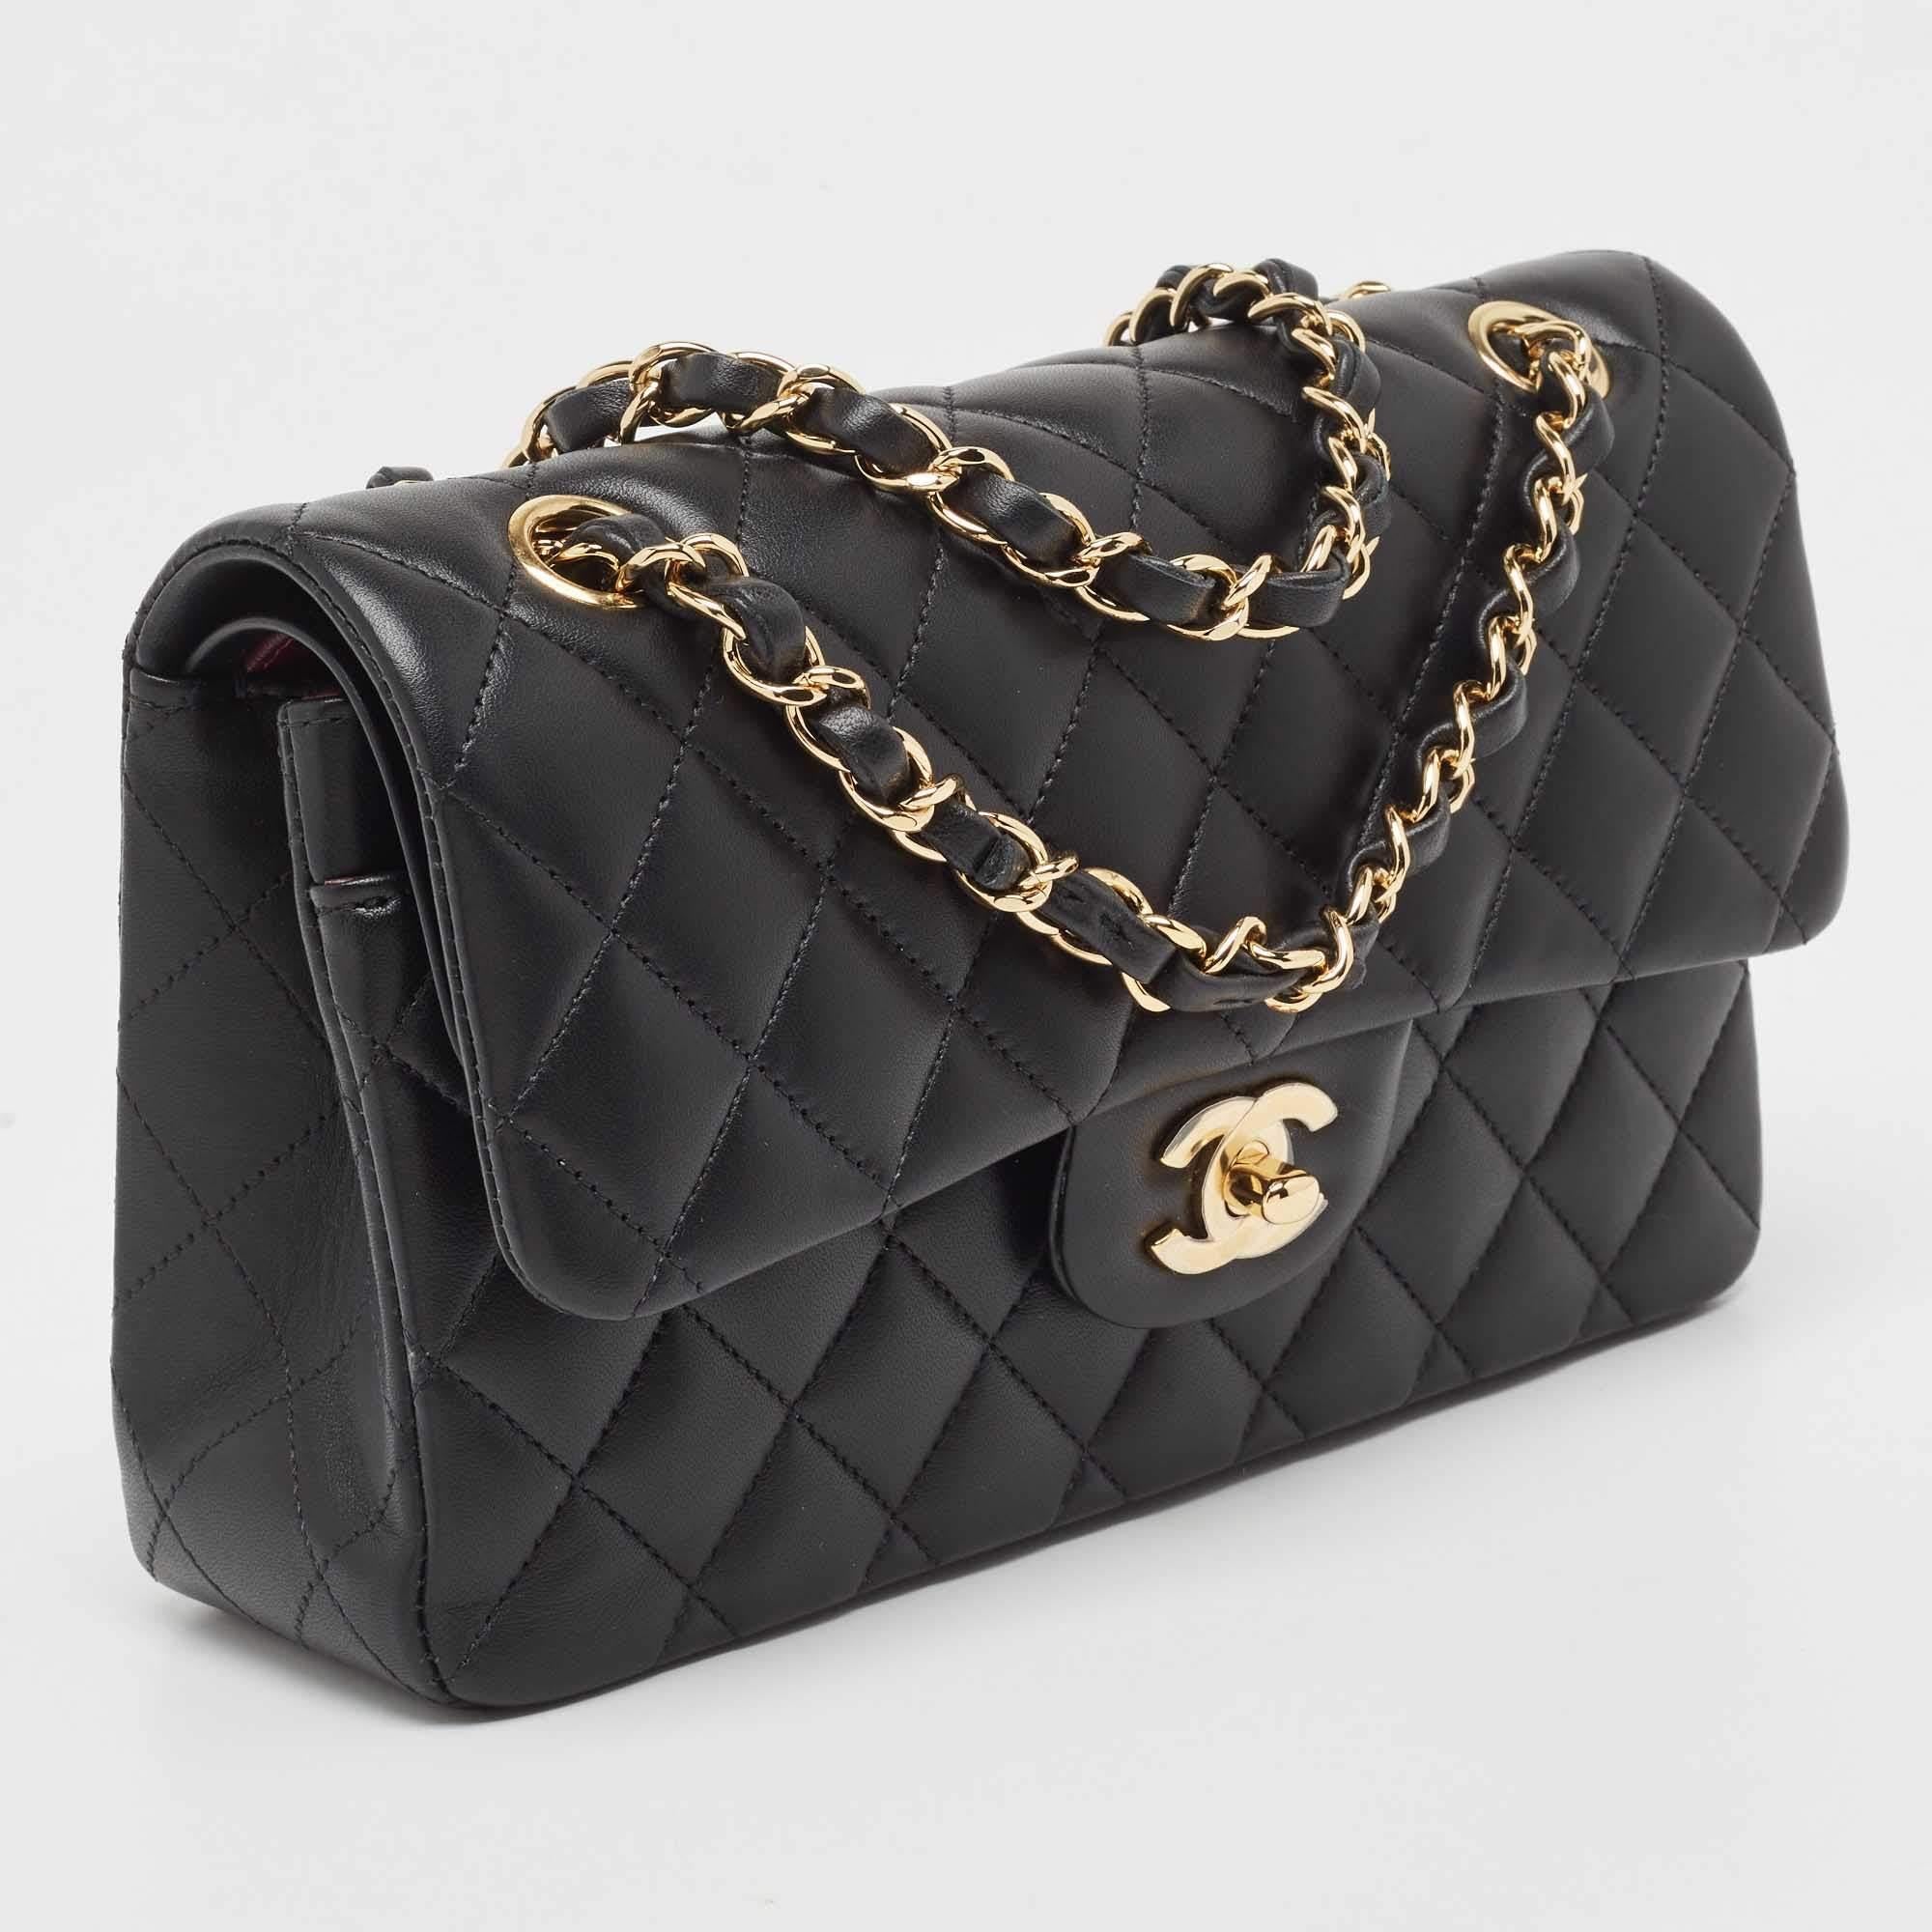 Women's Chanel Black Quilted Leather Small Classic Double Flap Bag